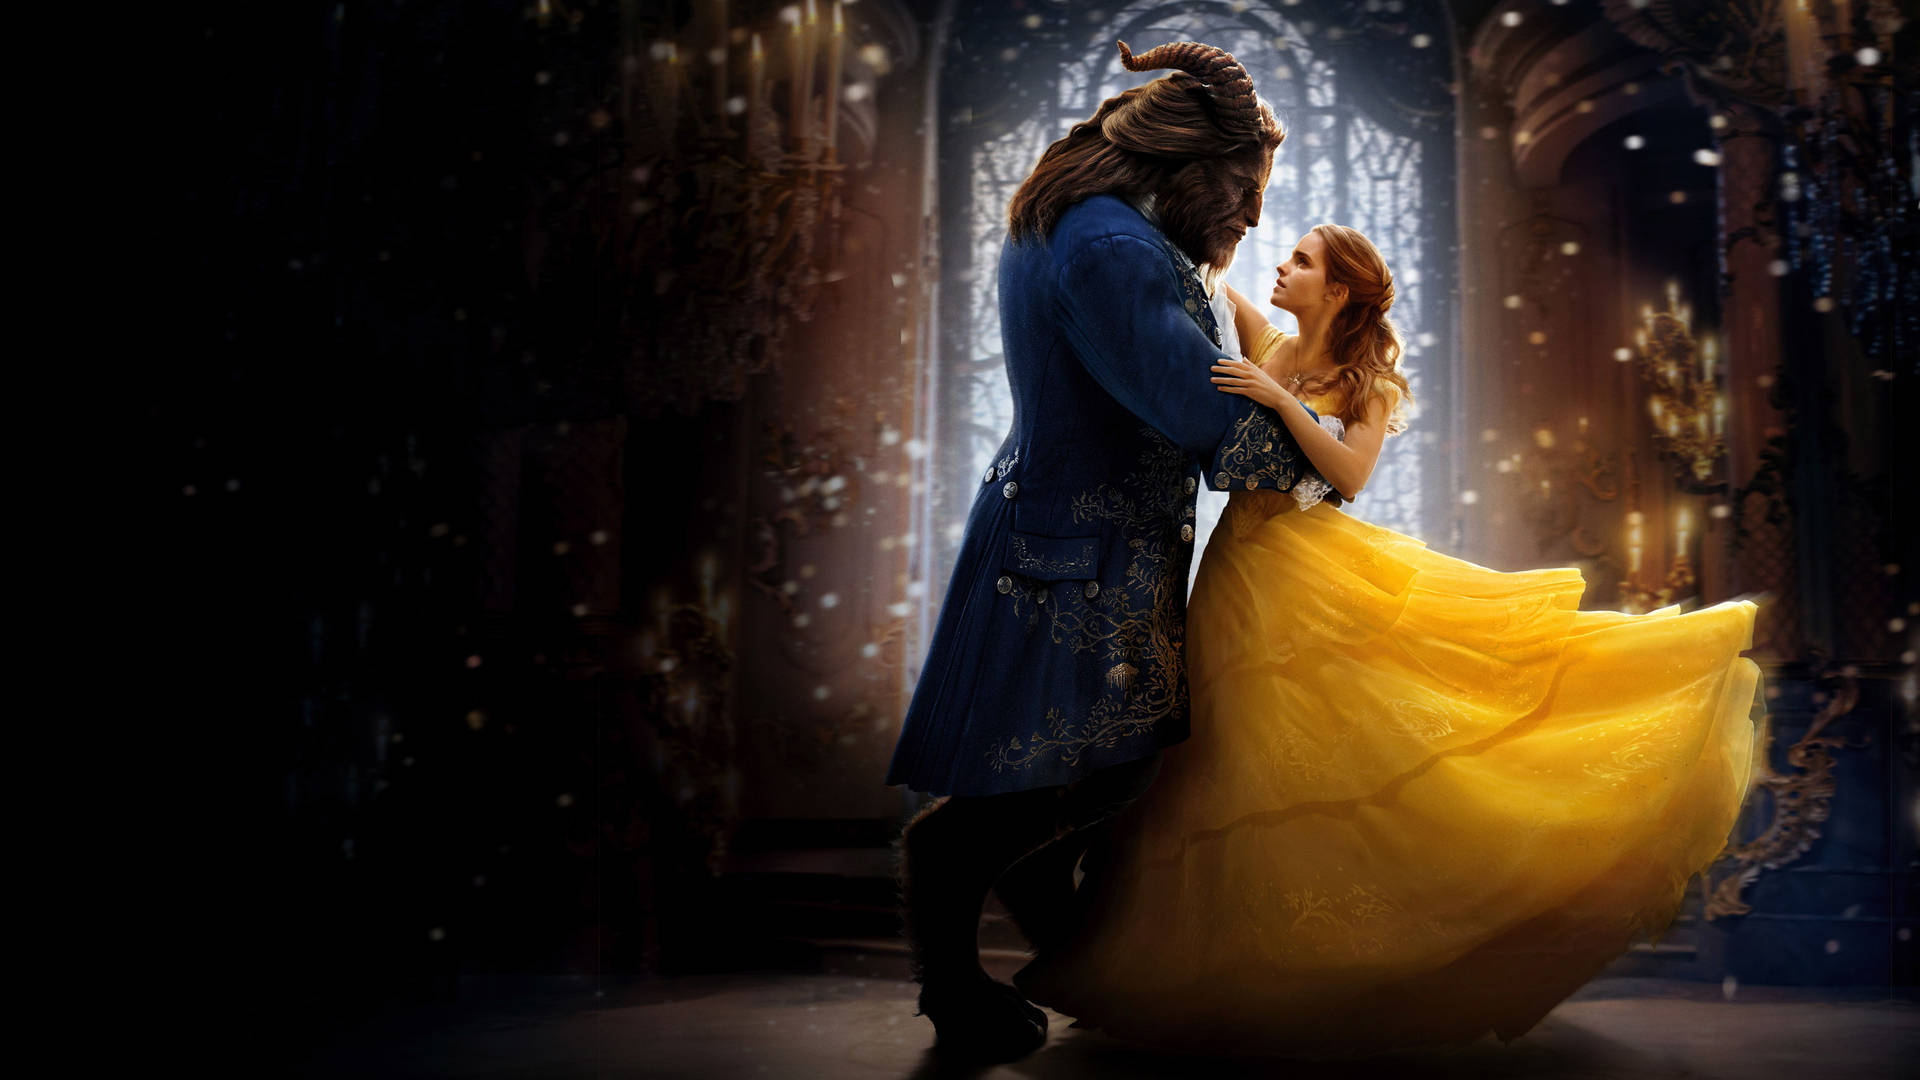 Beauty And The Beast 7680X4320 Wallpaper and Background Image